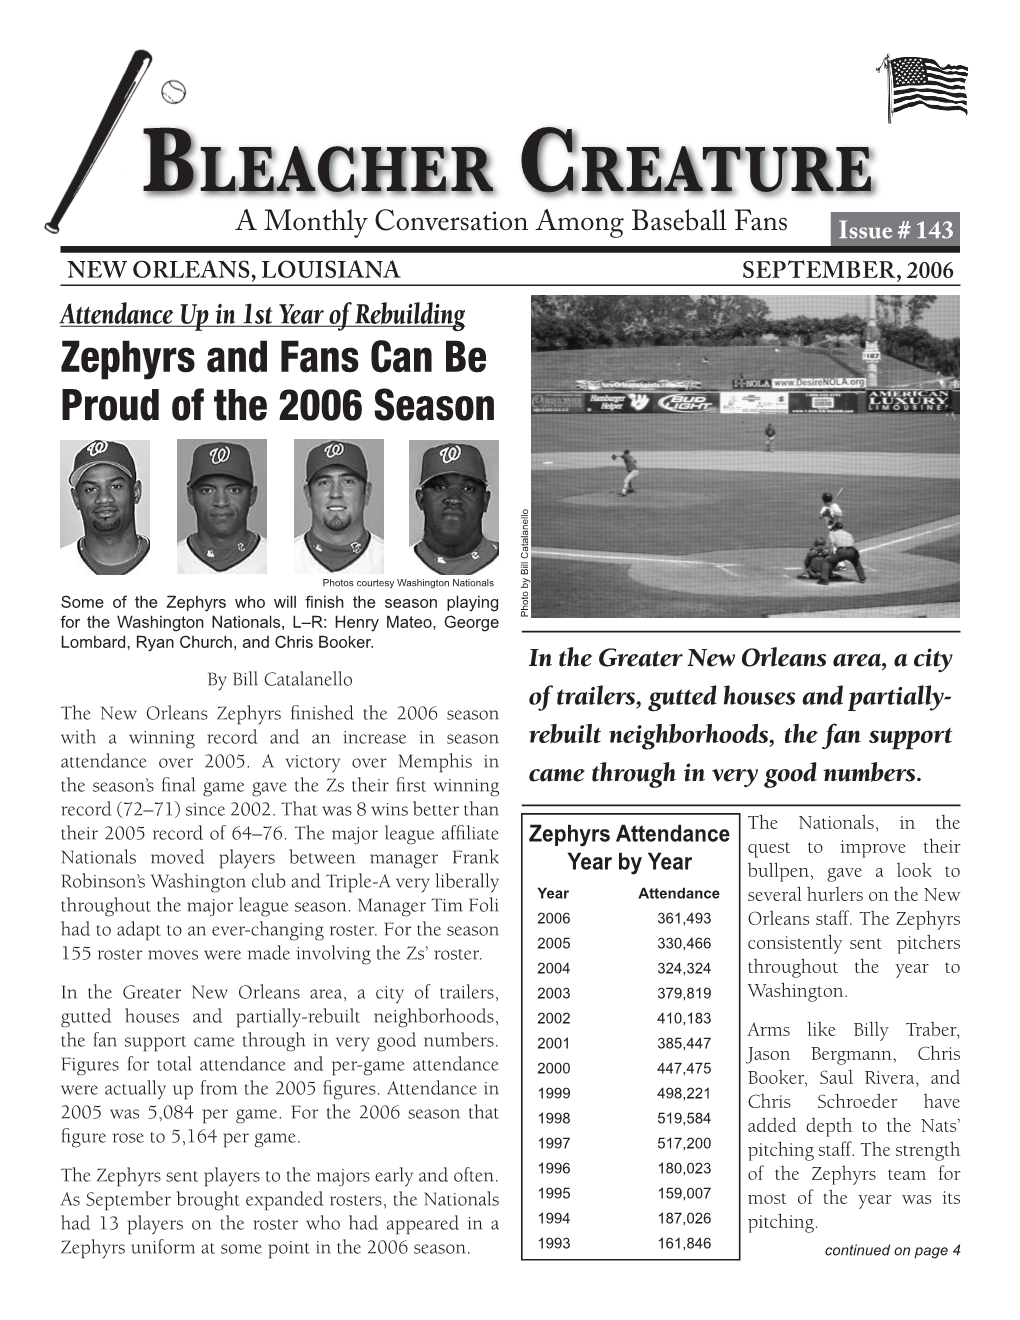 Zephyrs and Fans Can Be Proud of the 2006 Season